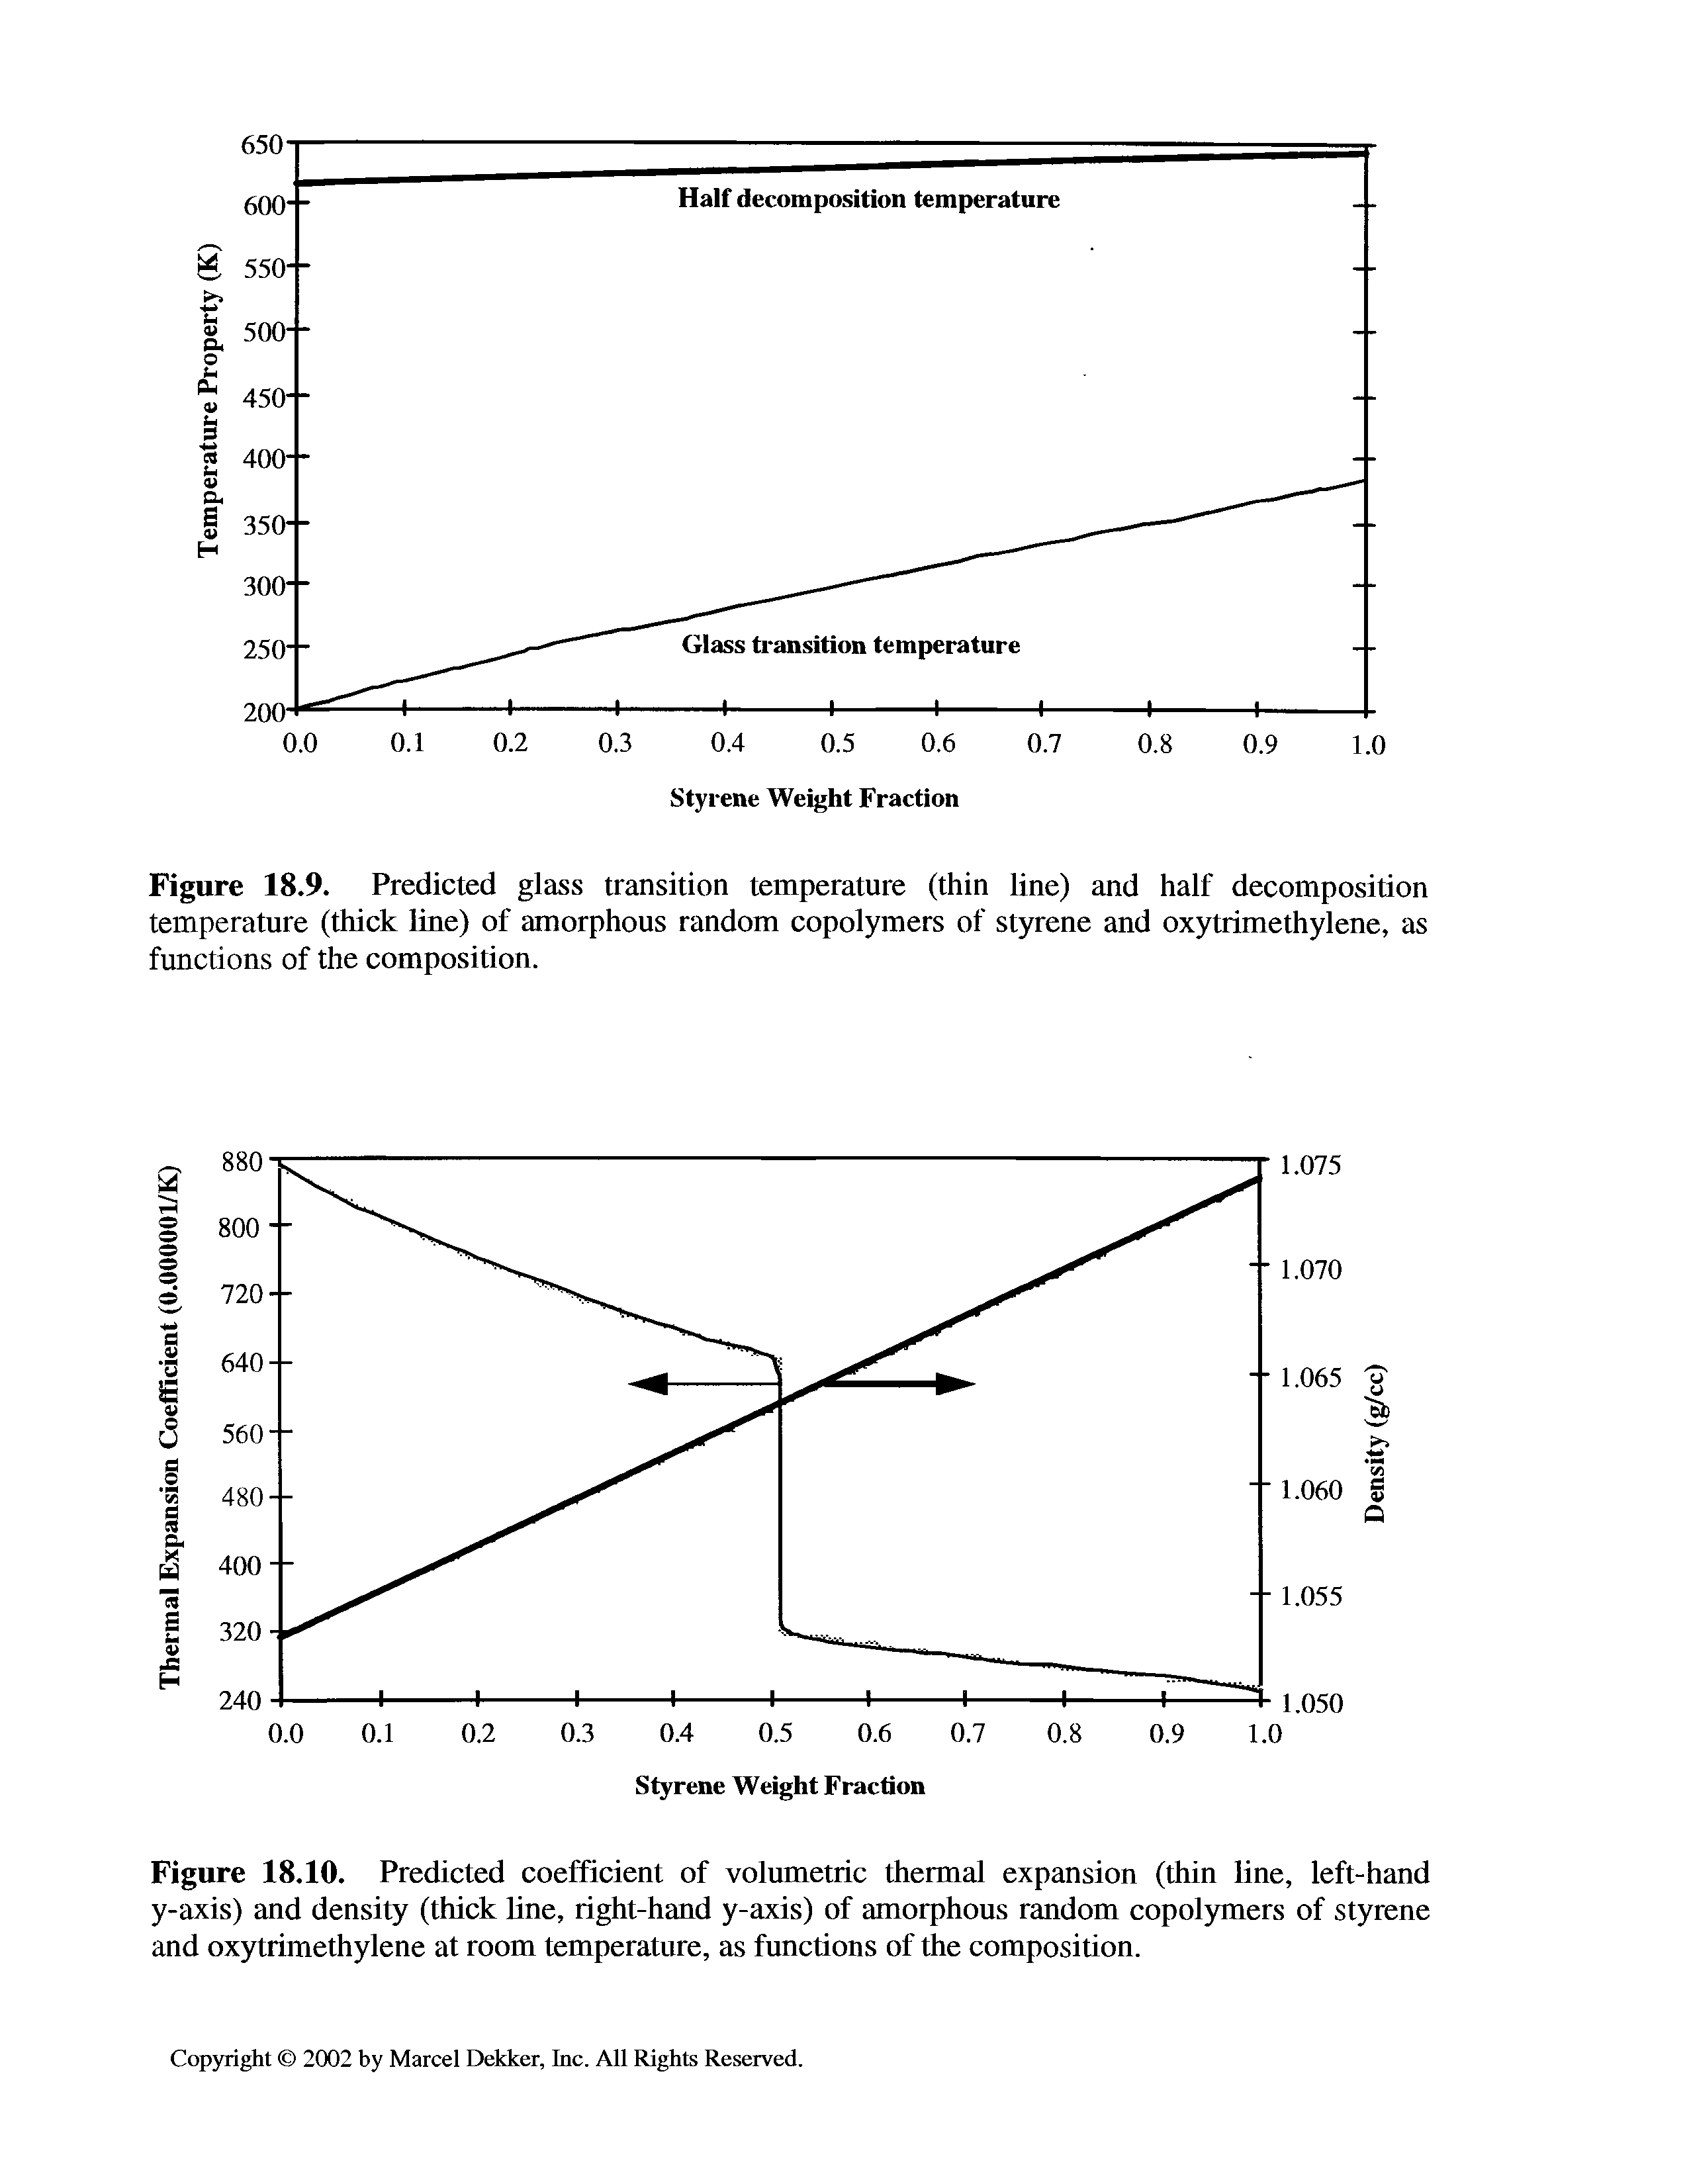 Figure 18.9. Predicted glass transition temperature (thin line) and half decomposition temperature (thick line) of amorphous random copolymers of styrene and oxytrimethylene, as functions of the composition.